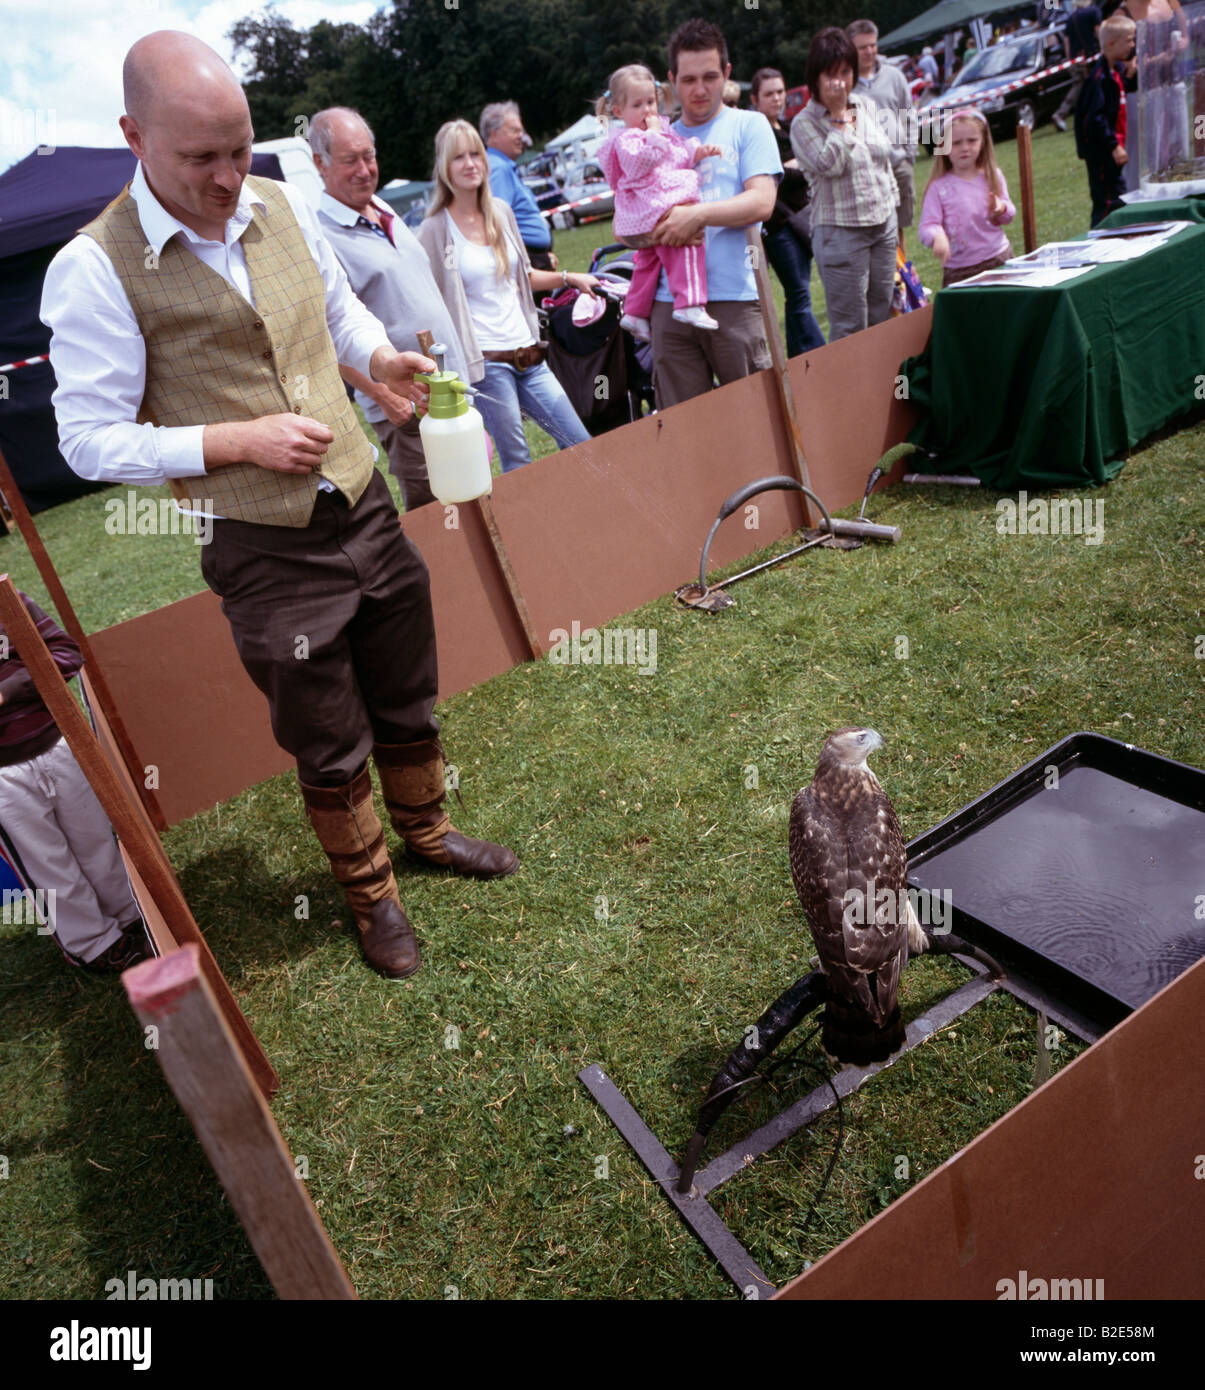 A bird of prey getting cooled with a squirt of water. Biggin Hill Festival, Bromley, Kent, England, UK. Stock Photo